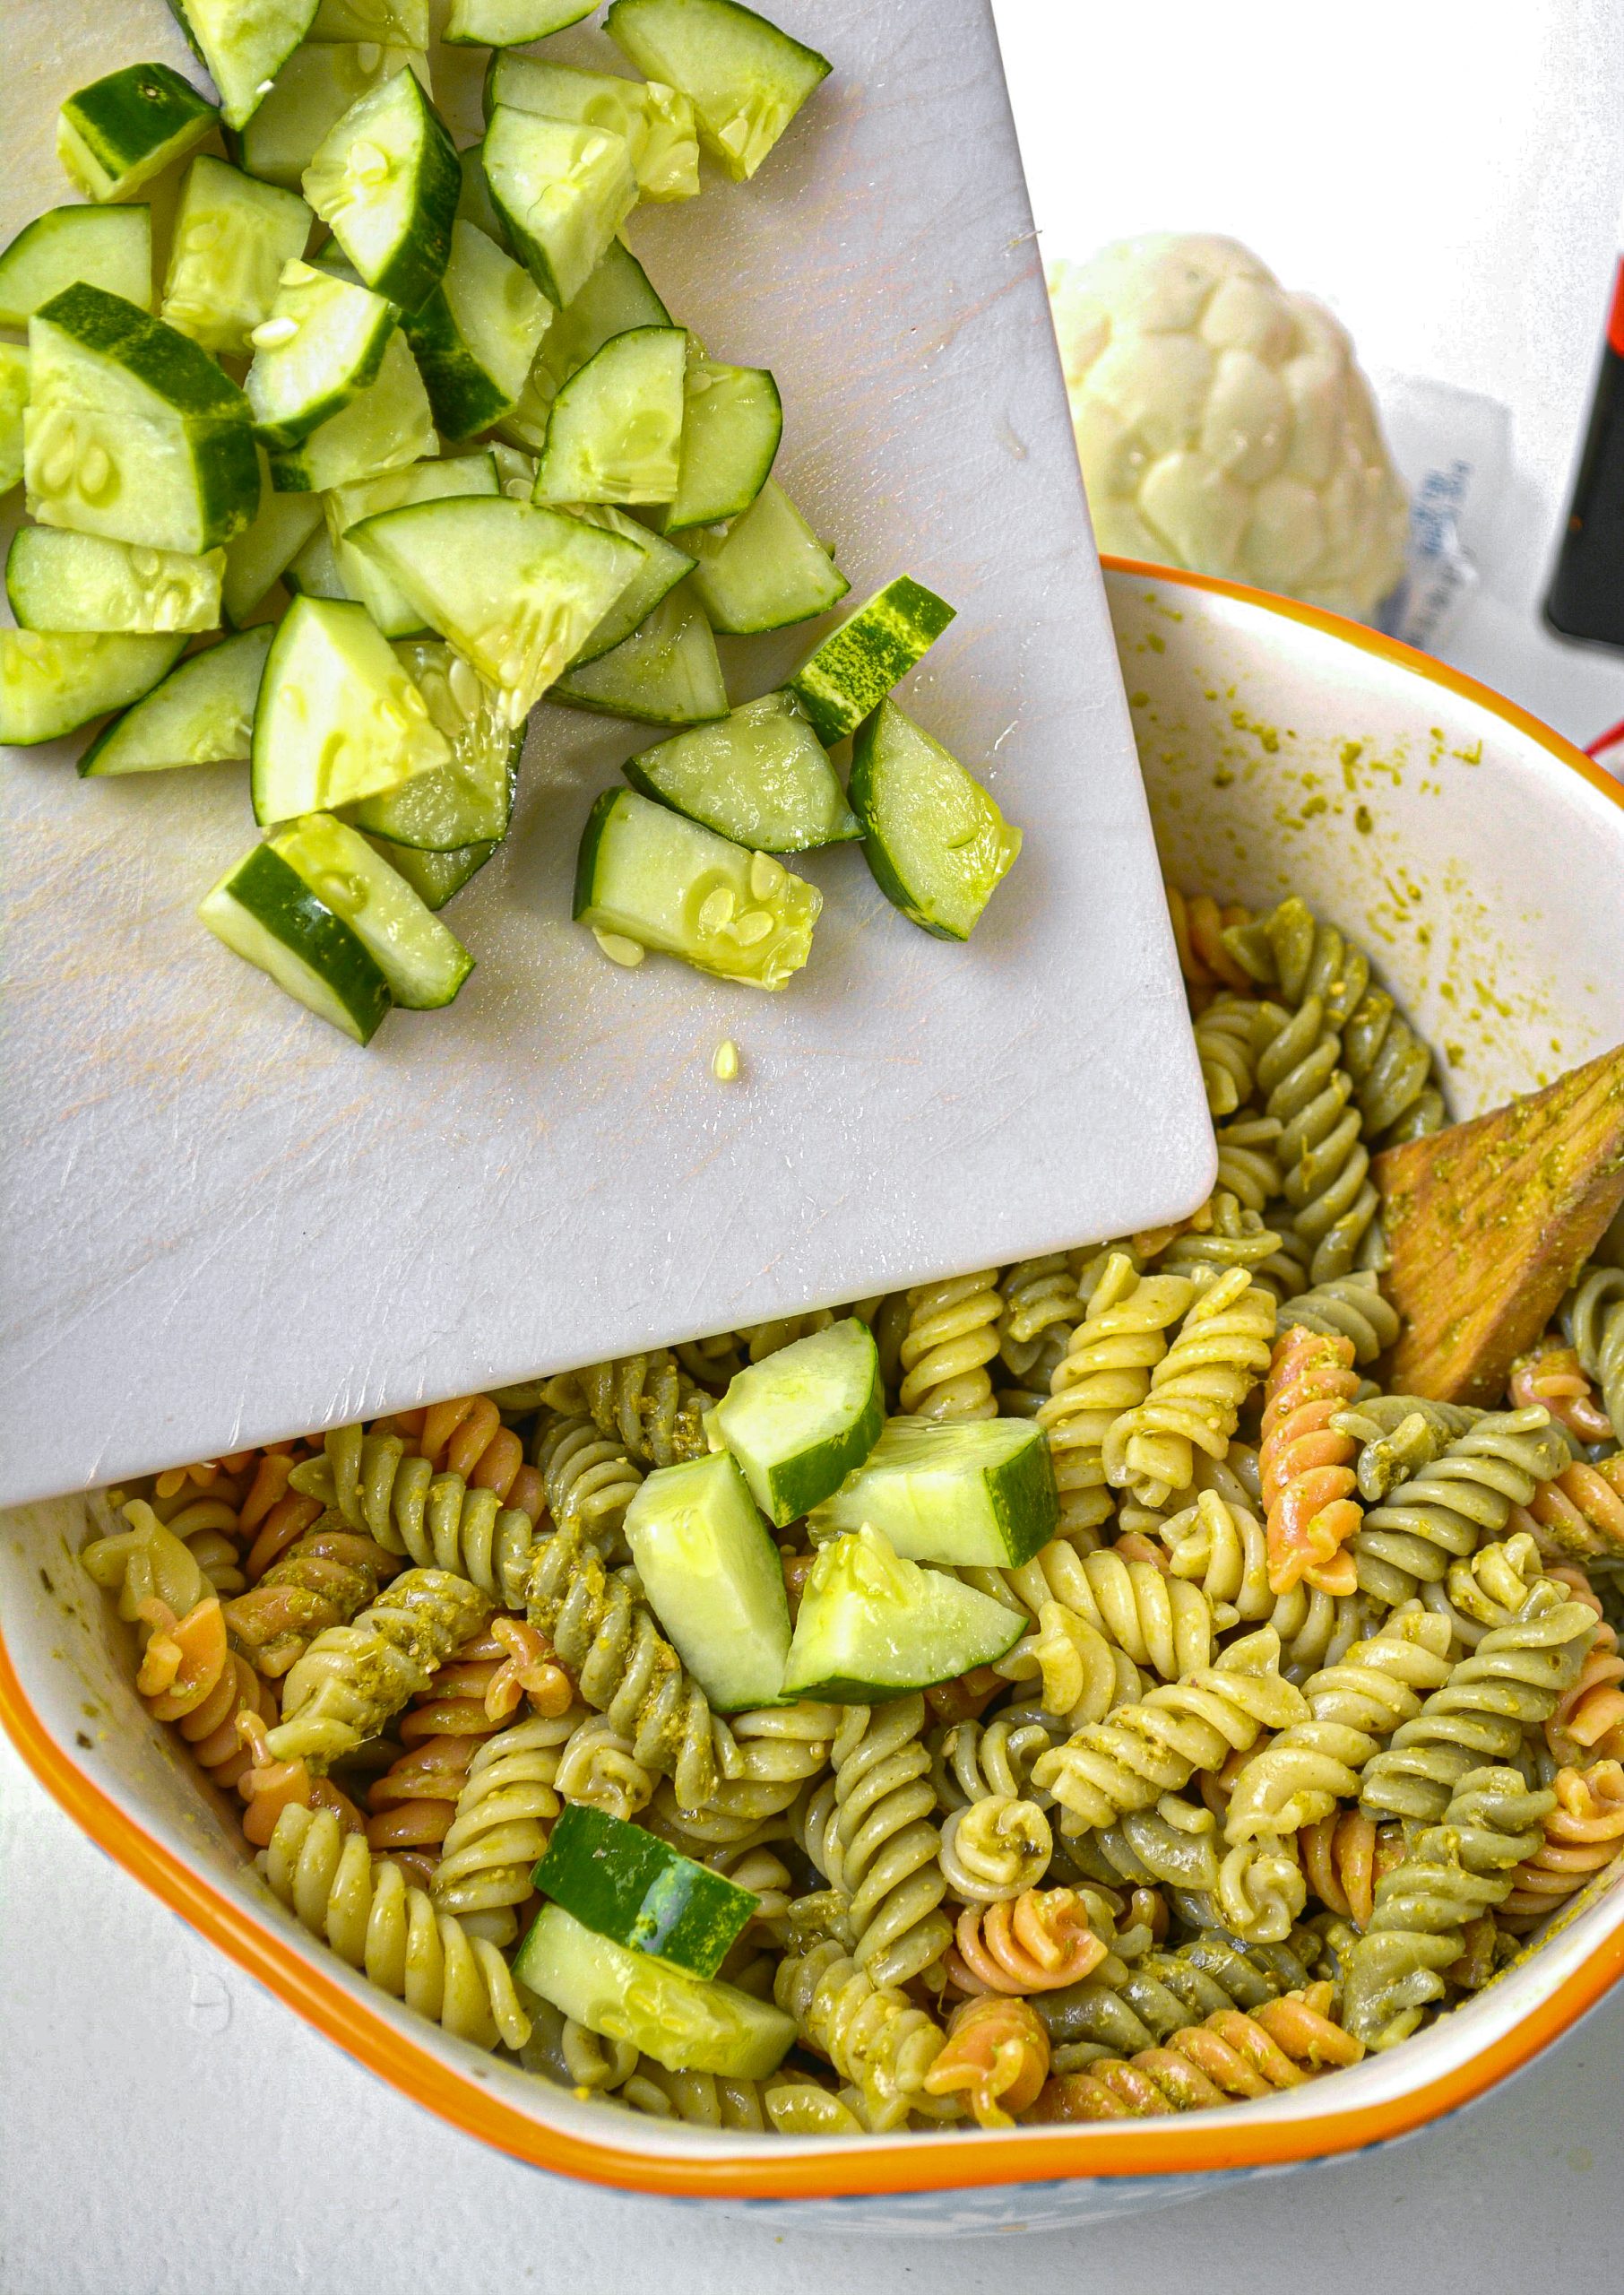 Add one chopped cucumber to the pasta.